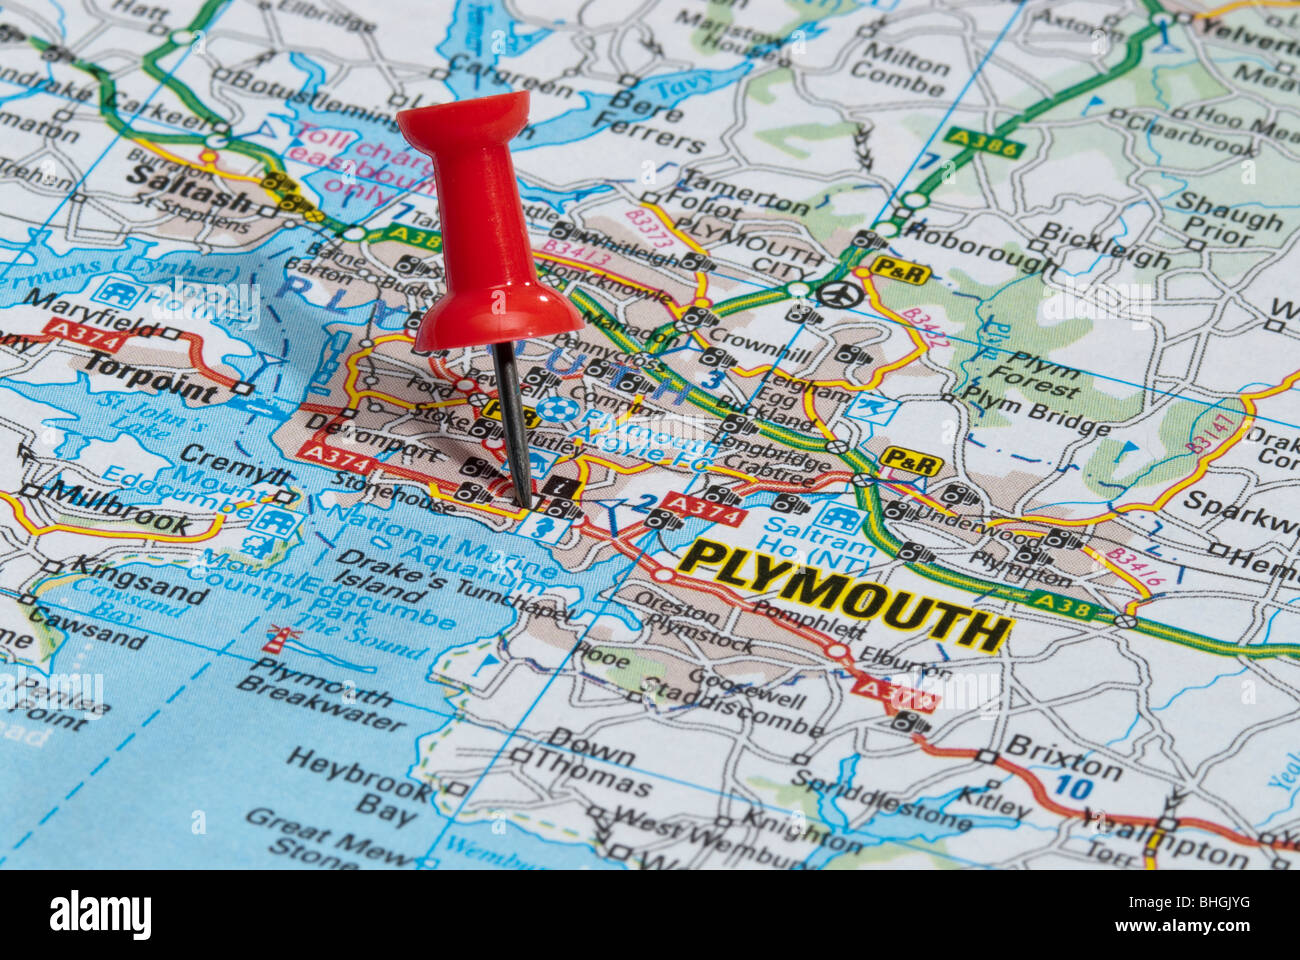 Red Map Pin In Road Map Pointing To City Of Plymouth BHGJYG 